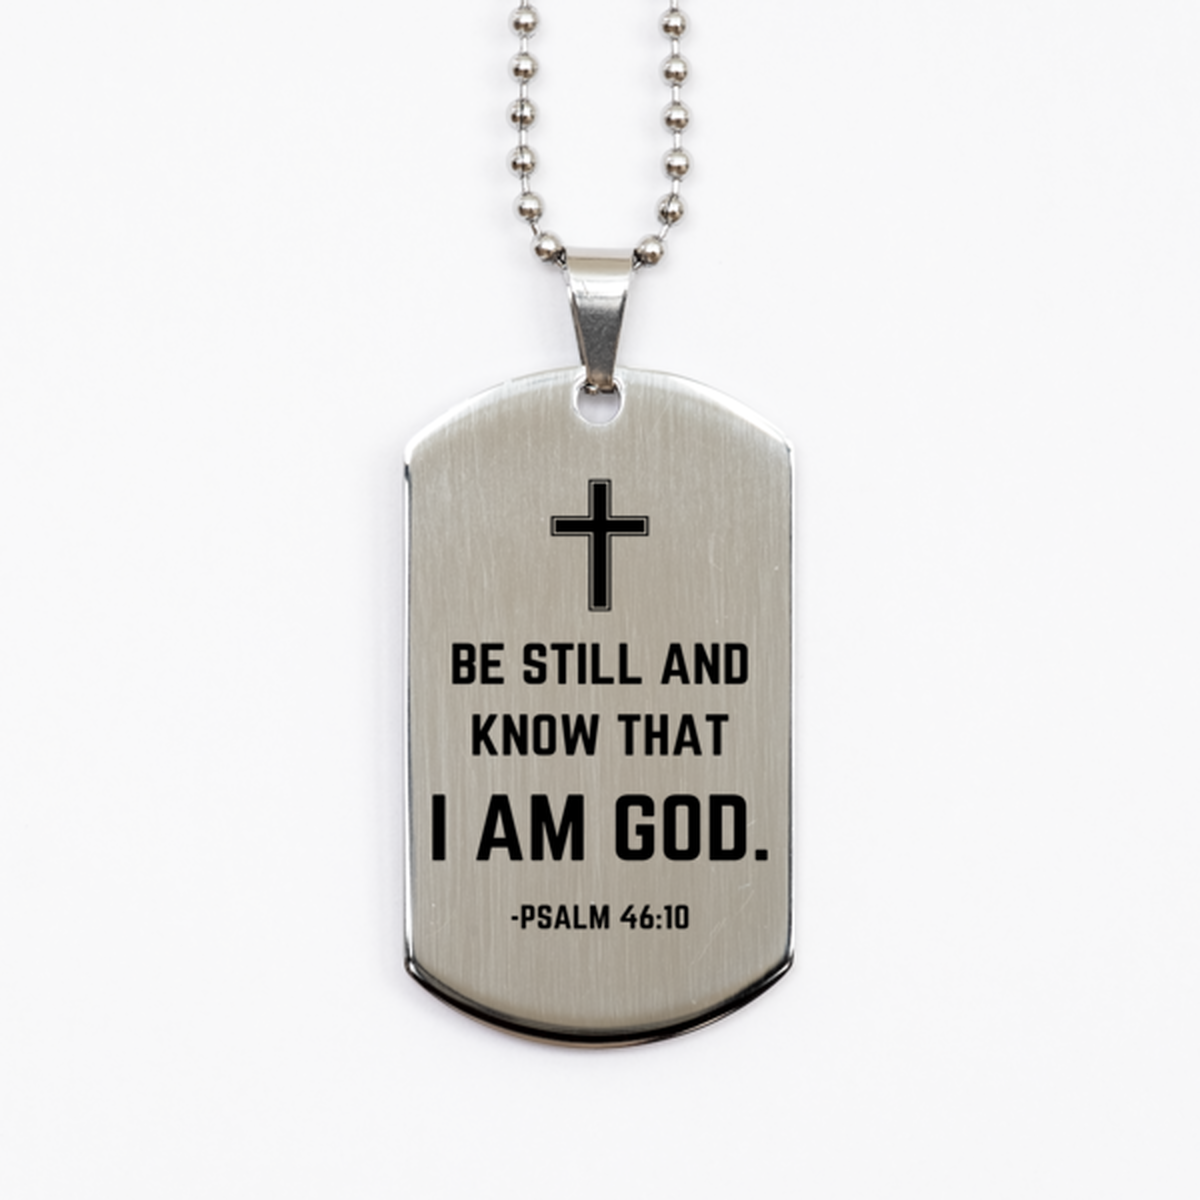 Baptism Gifts For Teenage Boys Girls, Christian Bible Verse Silver Dog Tag, Be still and know that I am god, Confirmation Gifts, Bible Verse Necklace for Son, Godson, Grandson, Nephew